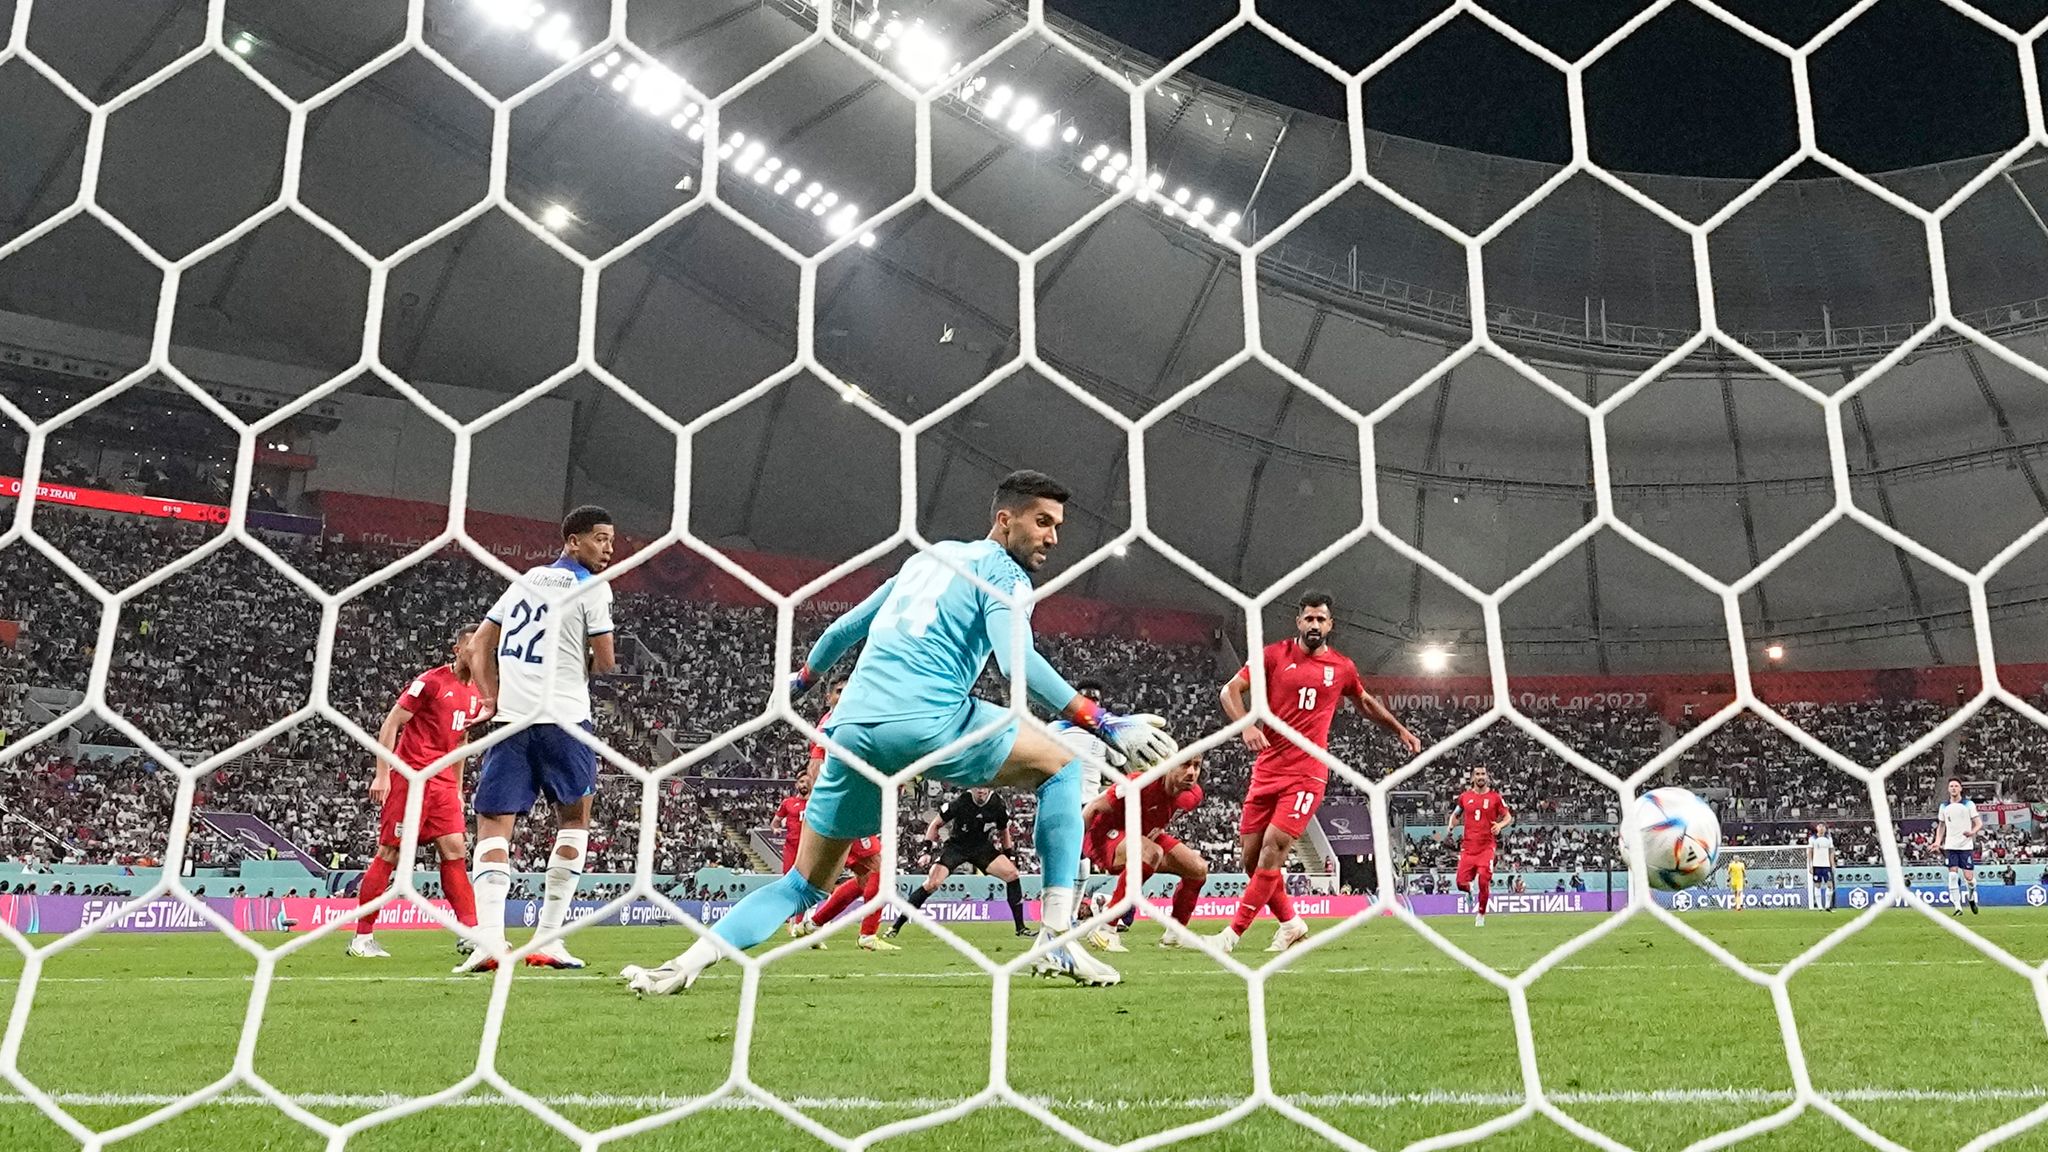 England begin their World Cup campaign with big win over Iran